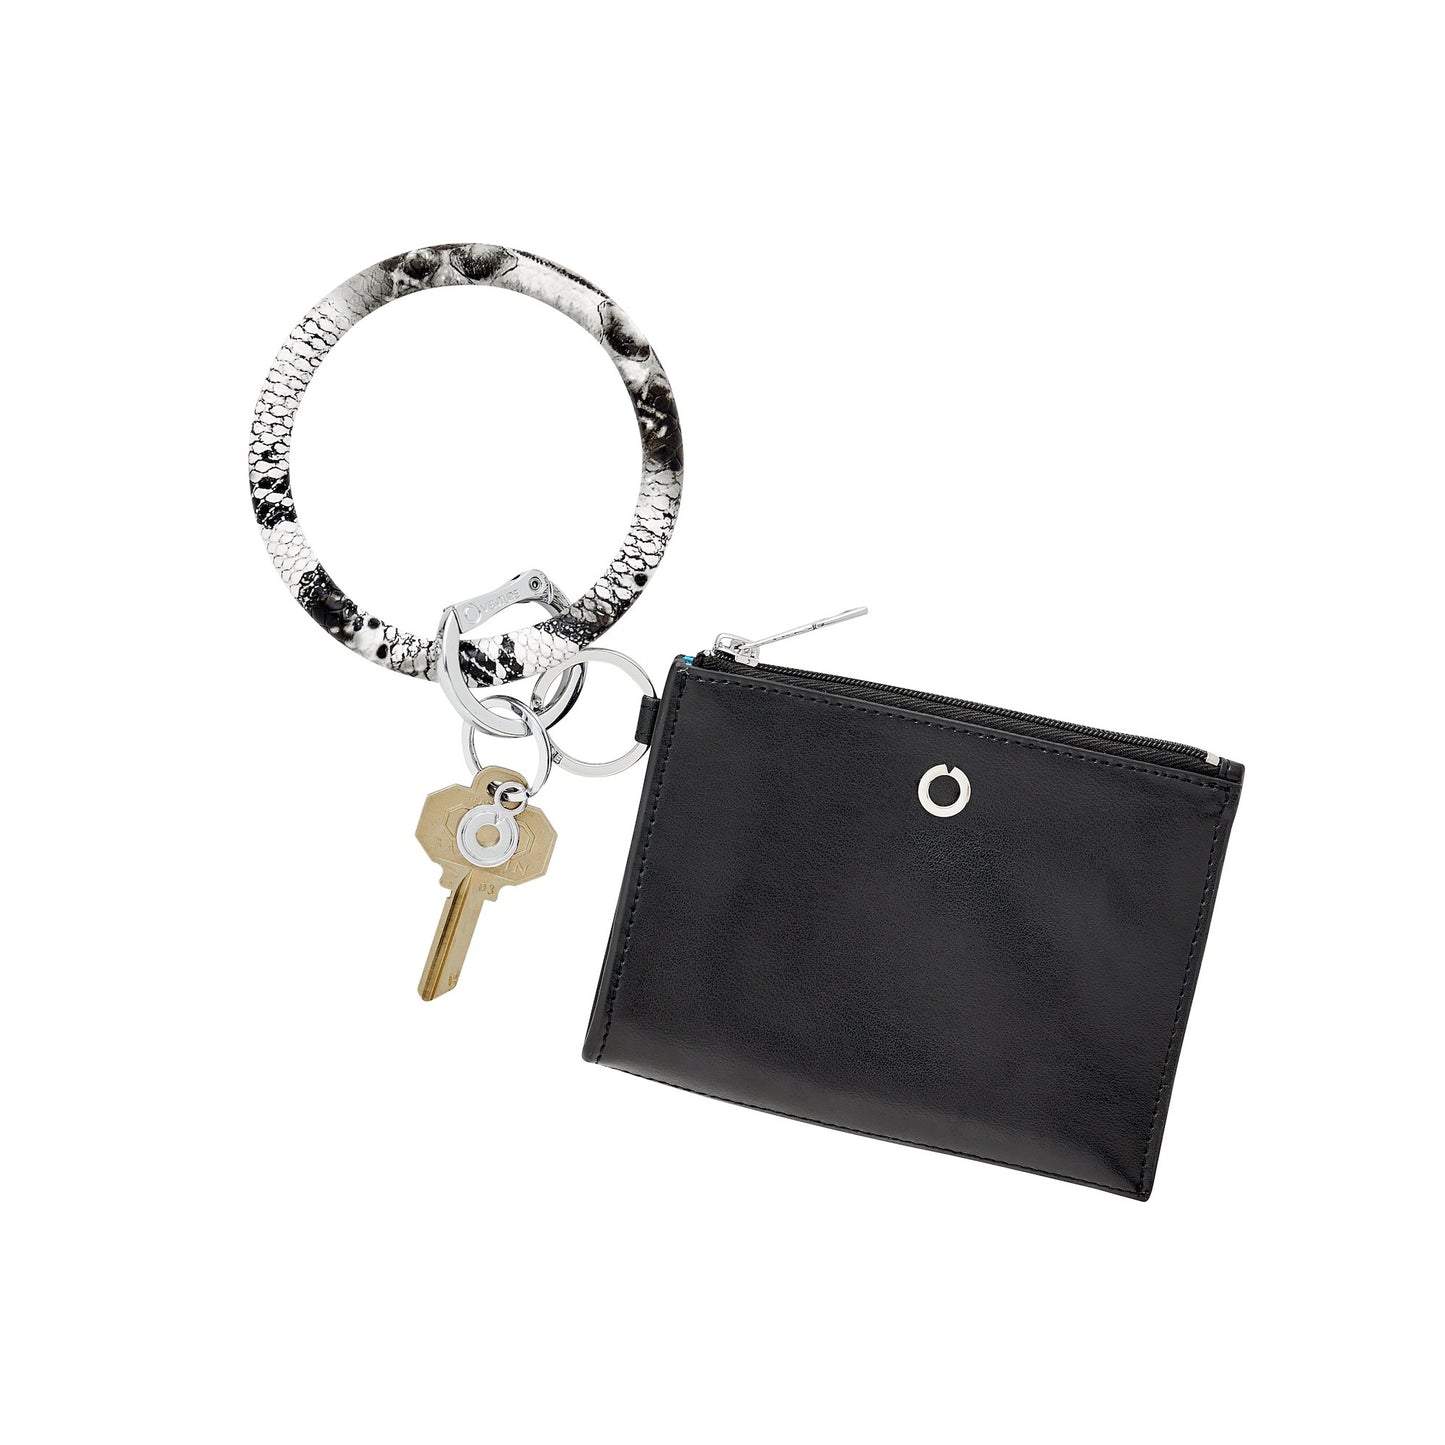 Back in Black - Ossential Leather Card Case - Oventure attached to the o ring in tuxedo leather Big O Key Ring